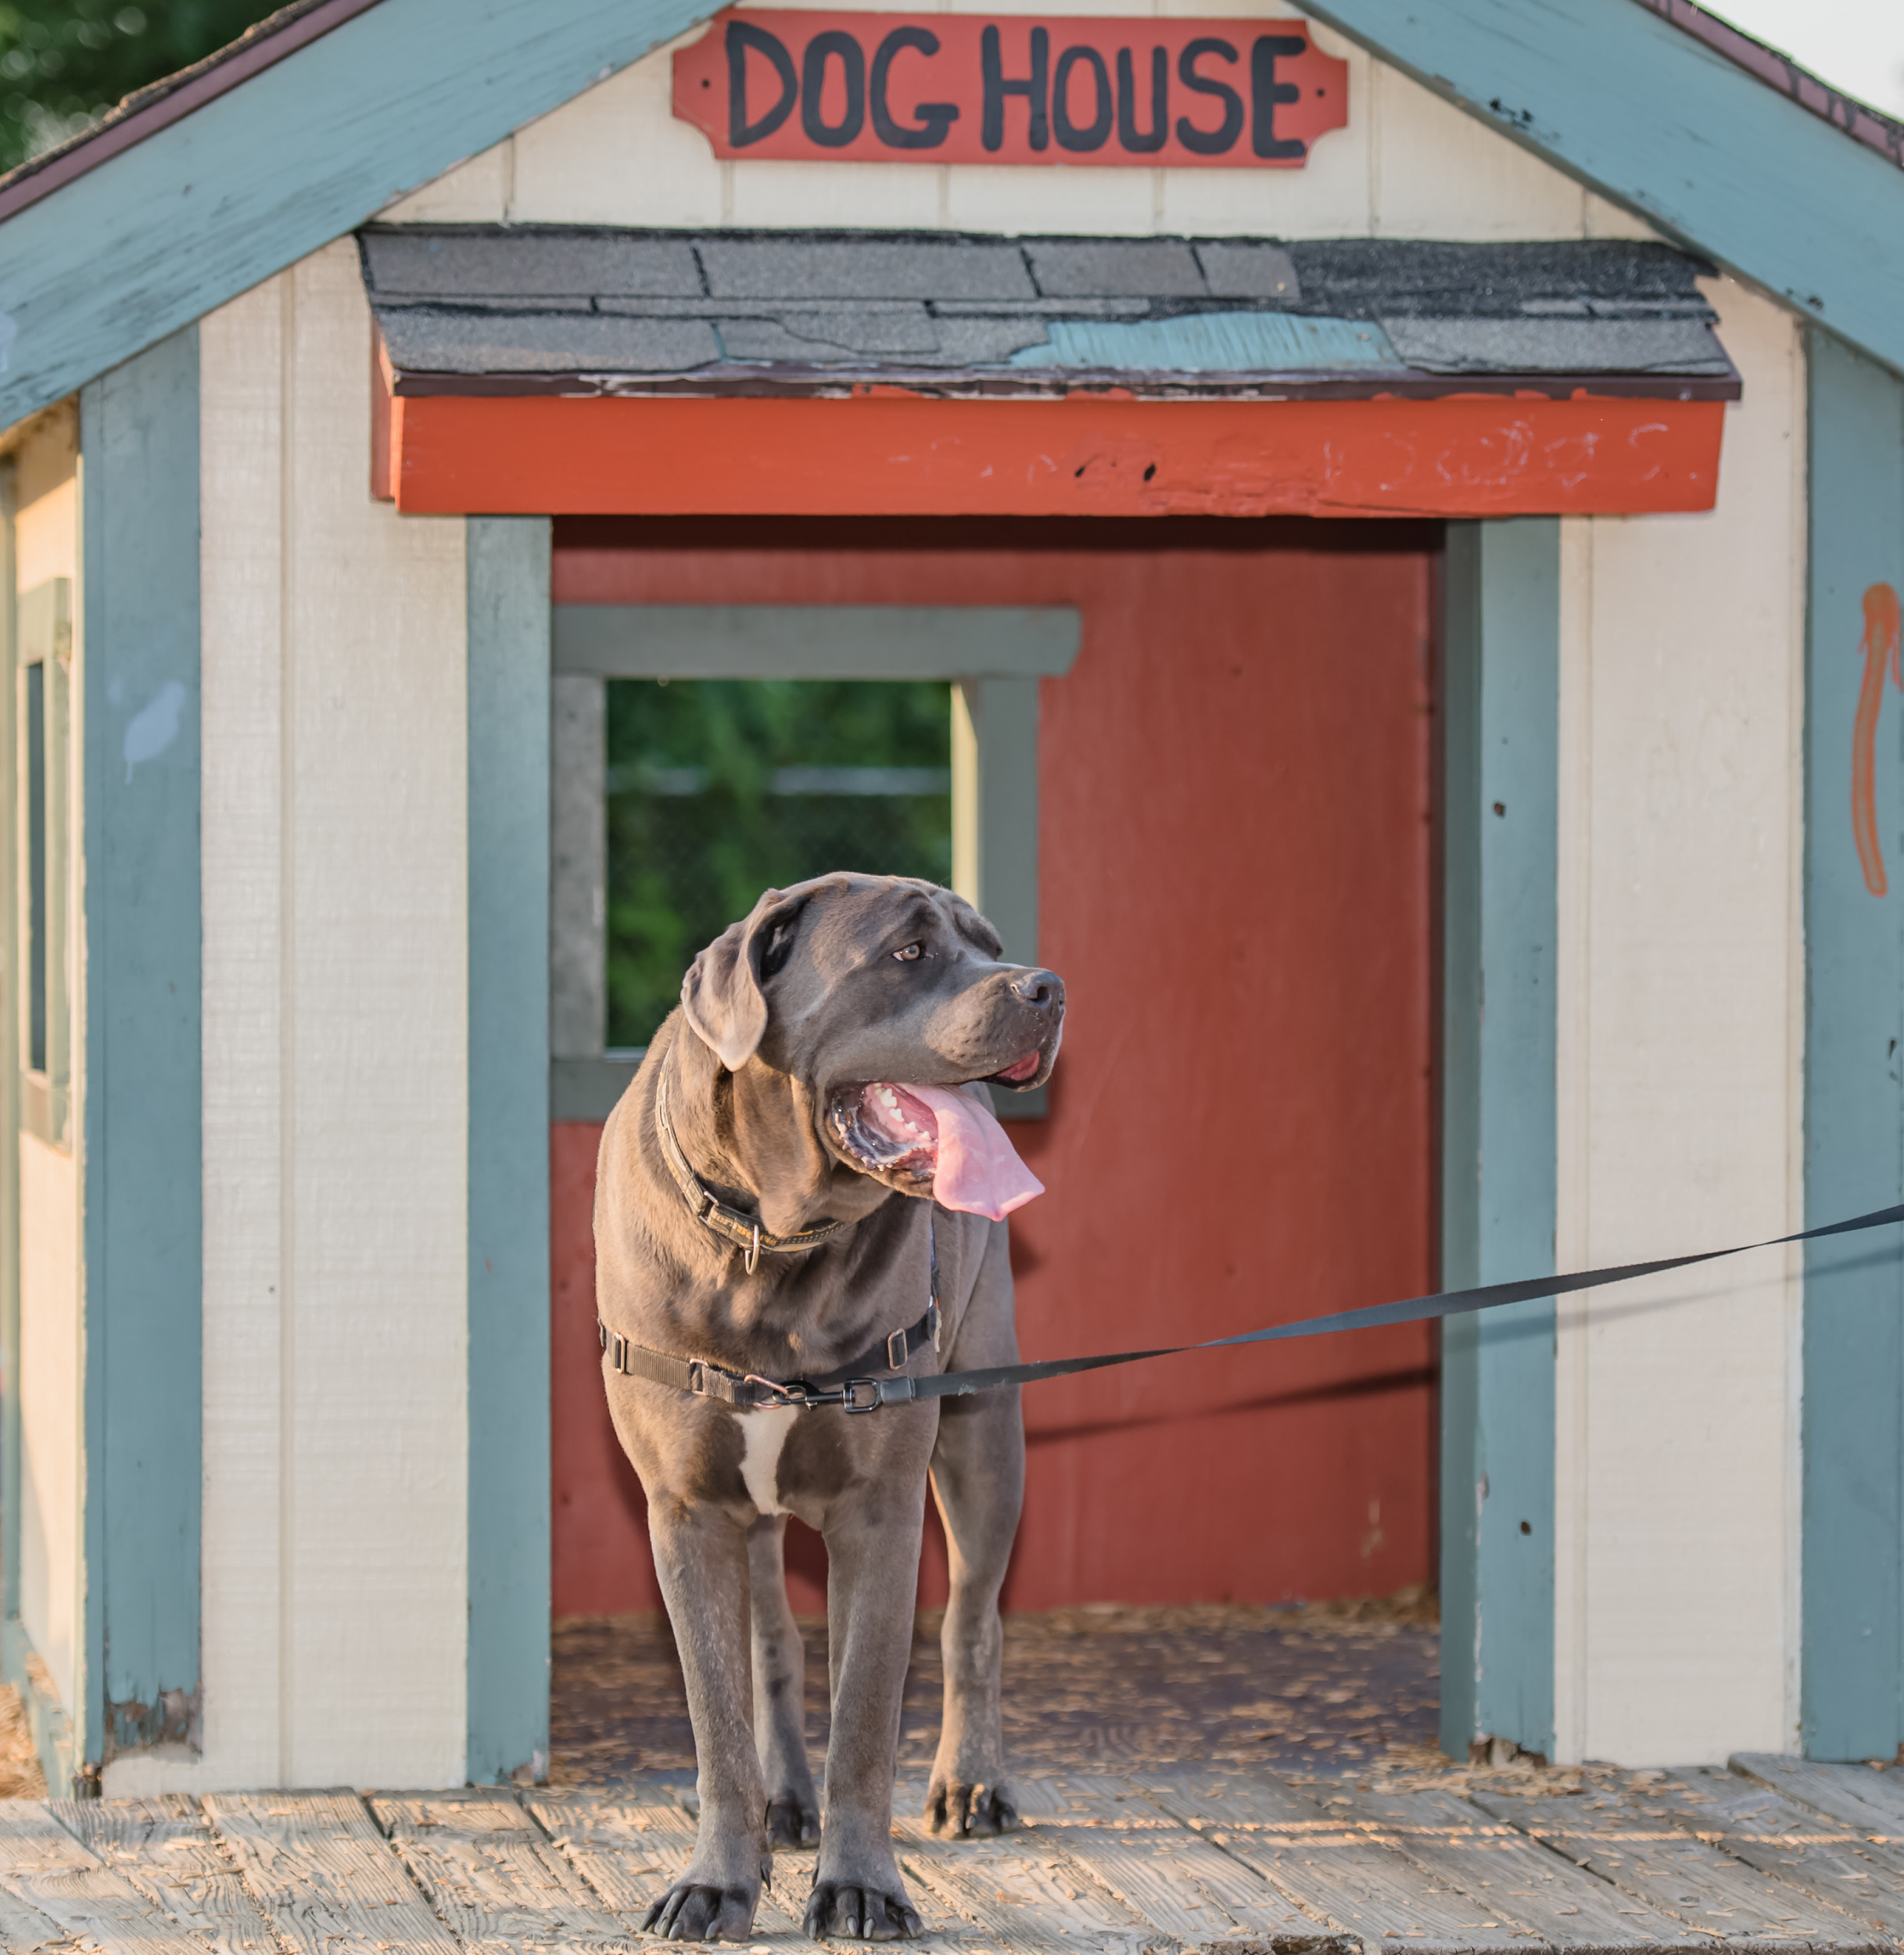 Dog standing outside a dog house